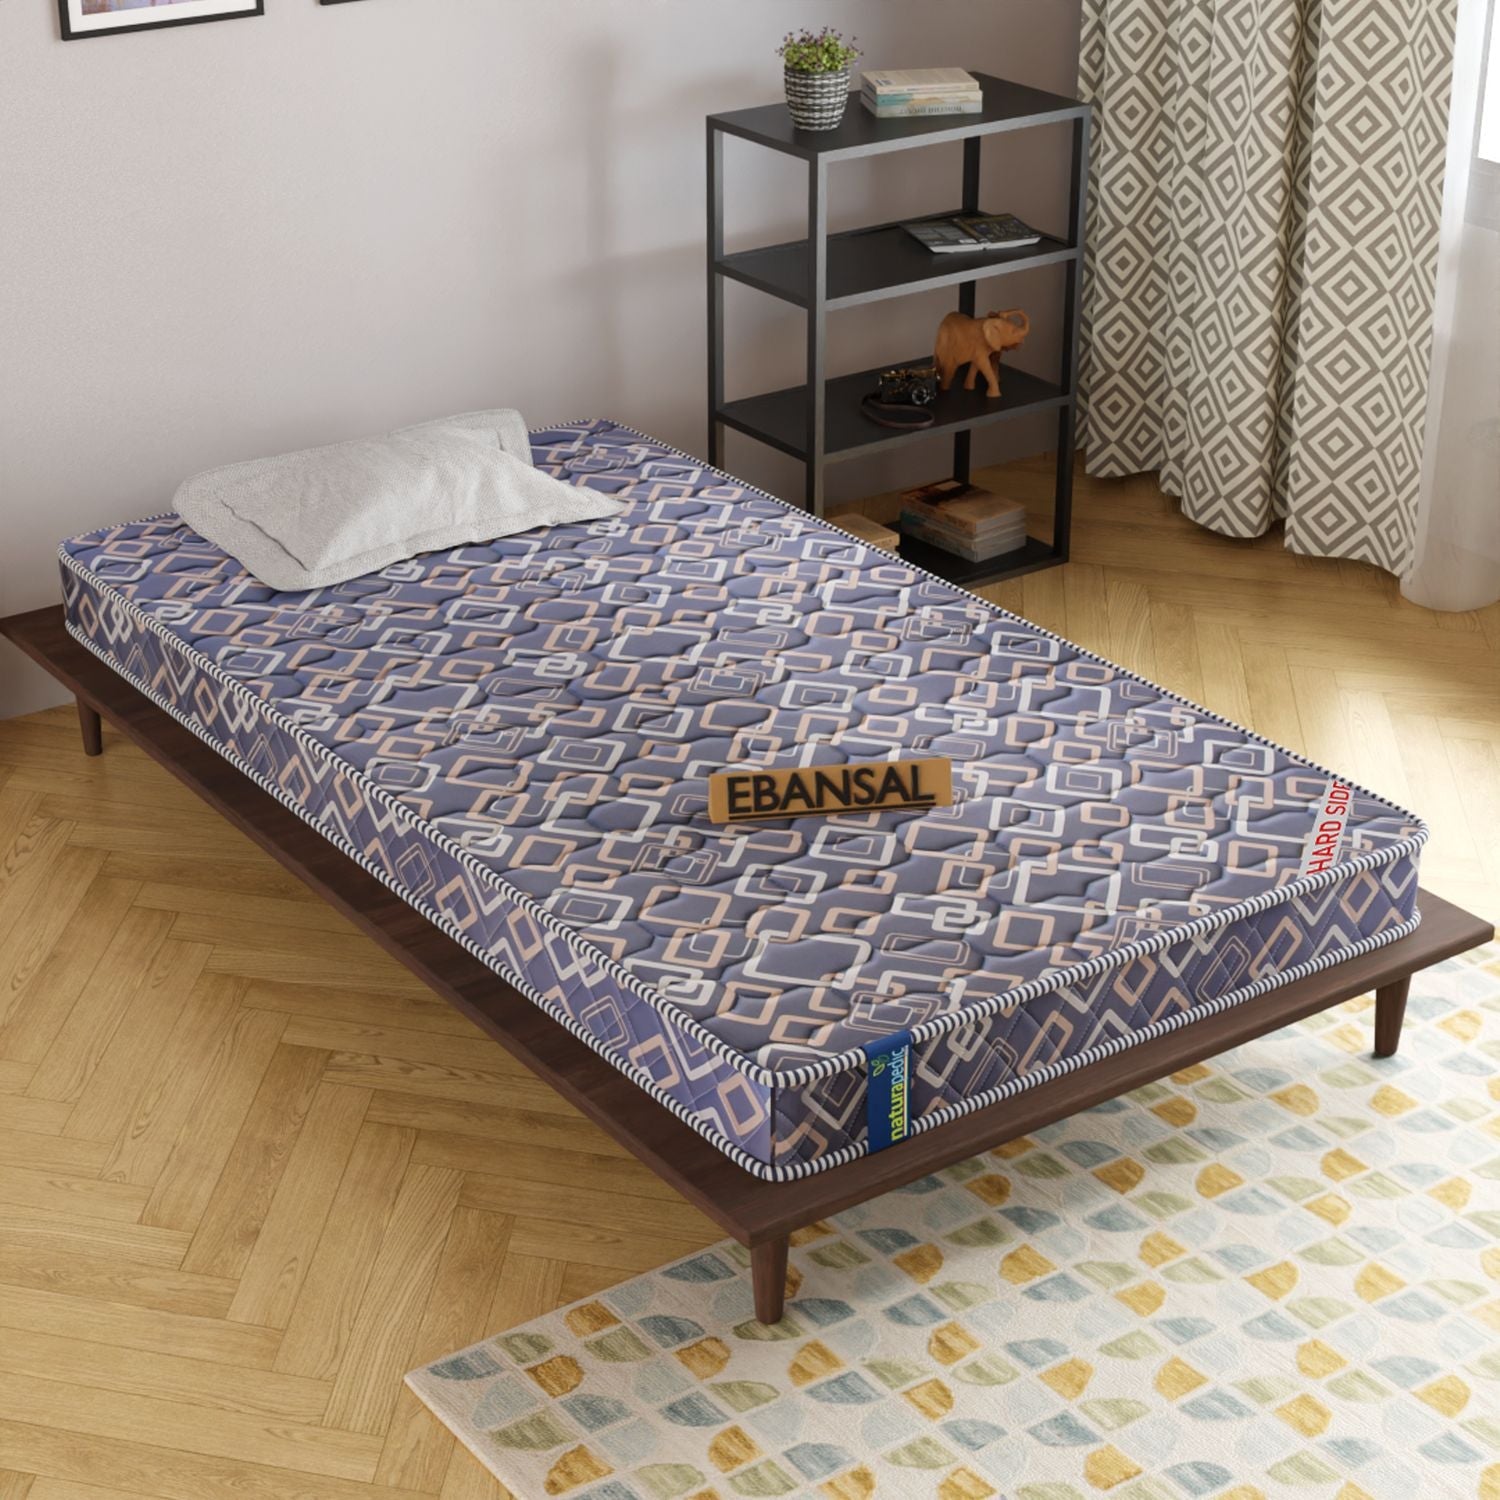 Single bed with Hard mattress